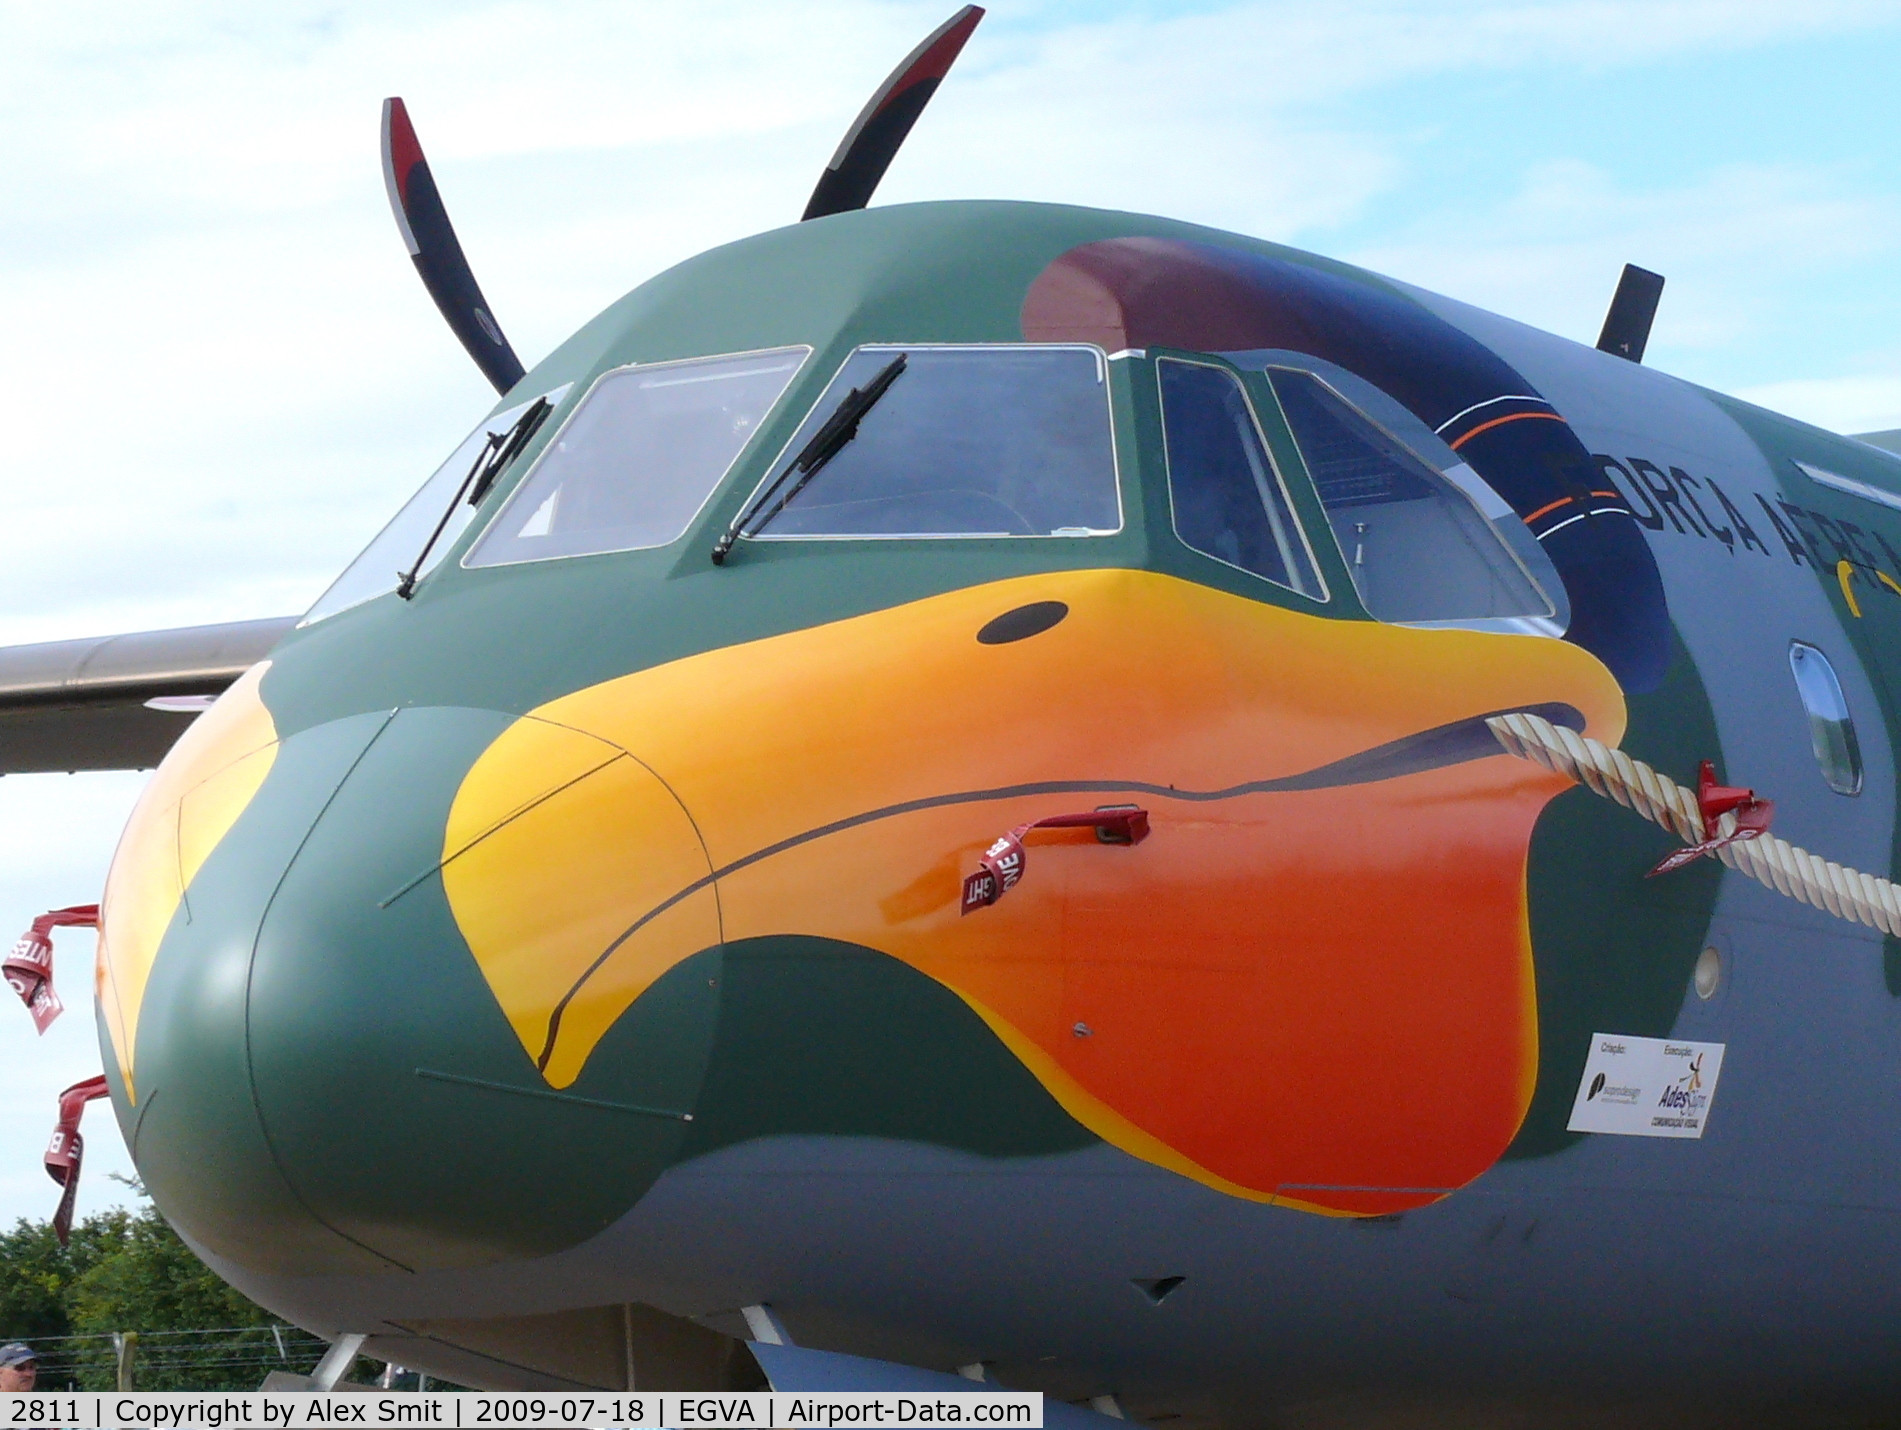 2811, 2009 CASA C-295M C-105A Amazonas C/N S-058, Casa C-105A Amazonas/C295 FAB2811 Brazilian Air Force dressed up as a pelican